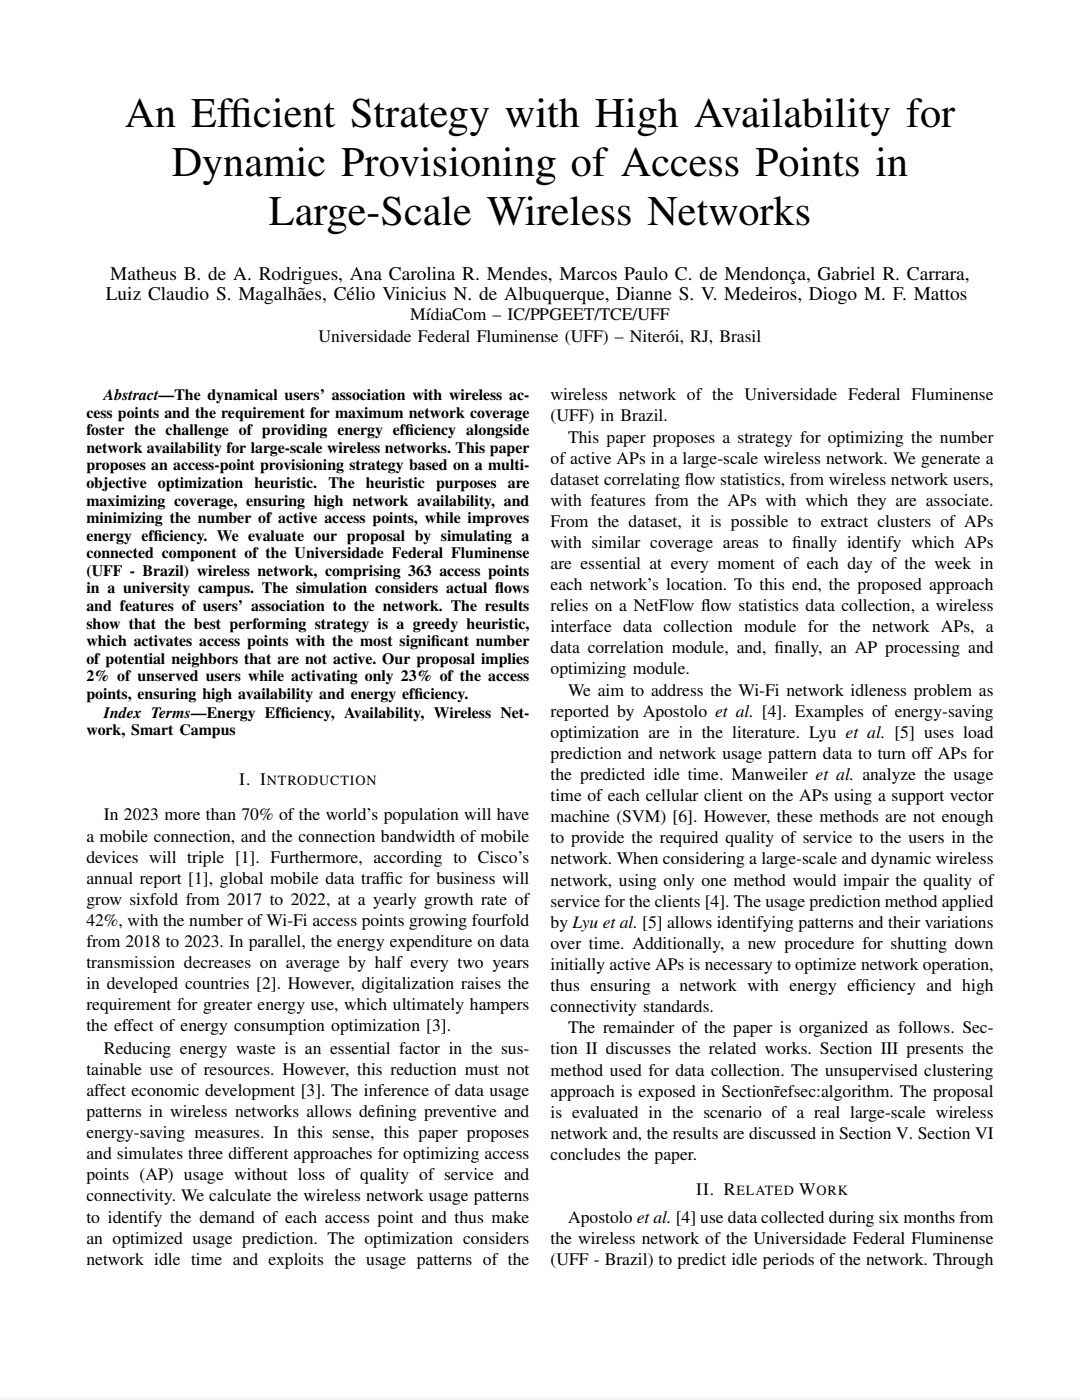 An Efficient Strategy with High Availability for Dynamic Provisioning of Access Points in Large-Scale Wireless Networks